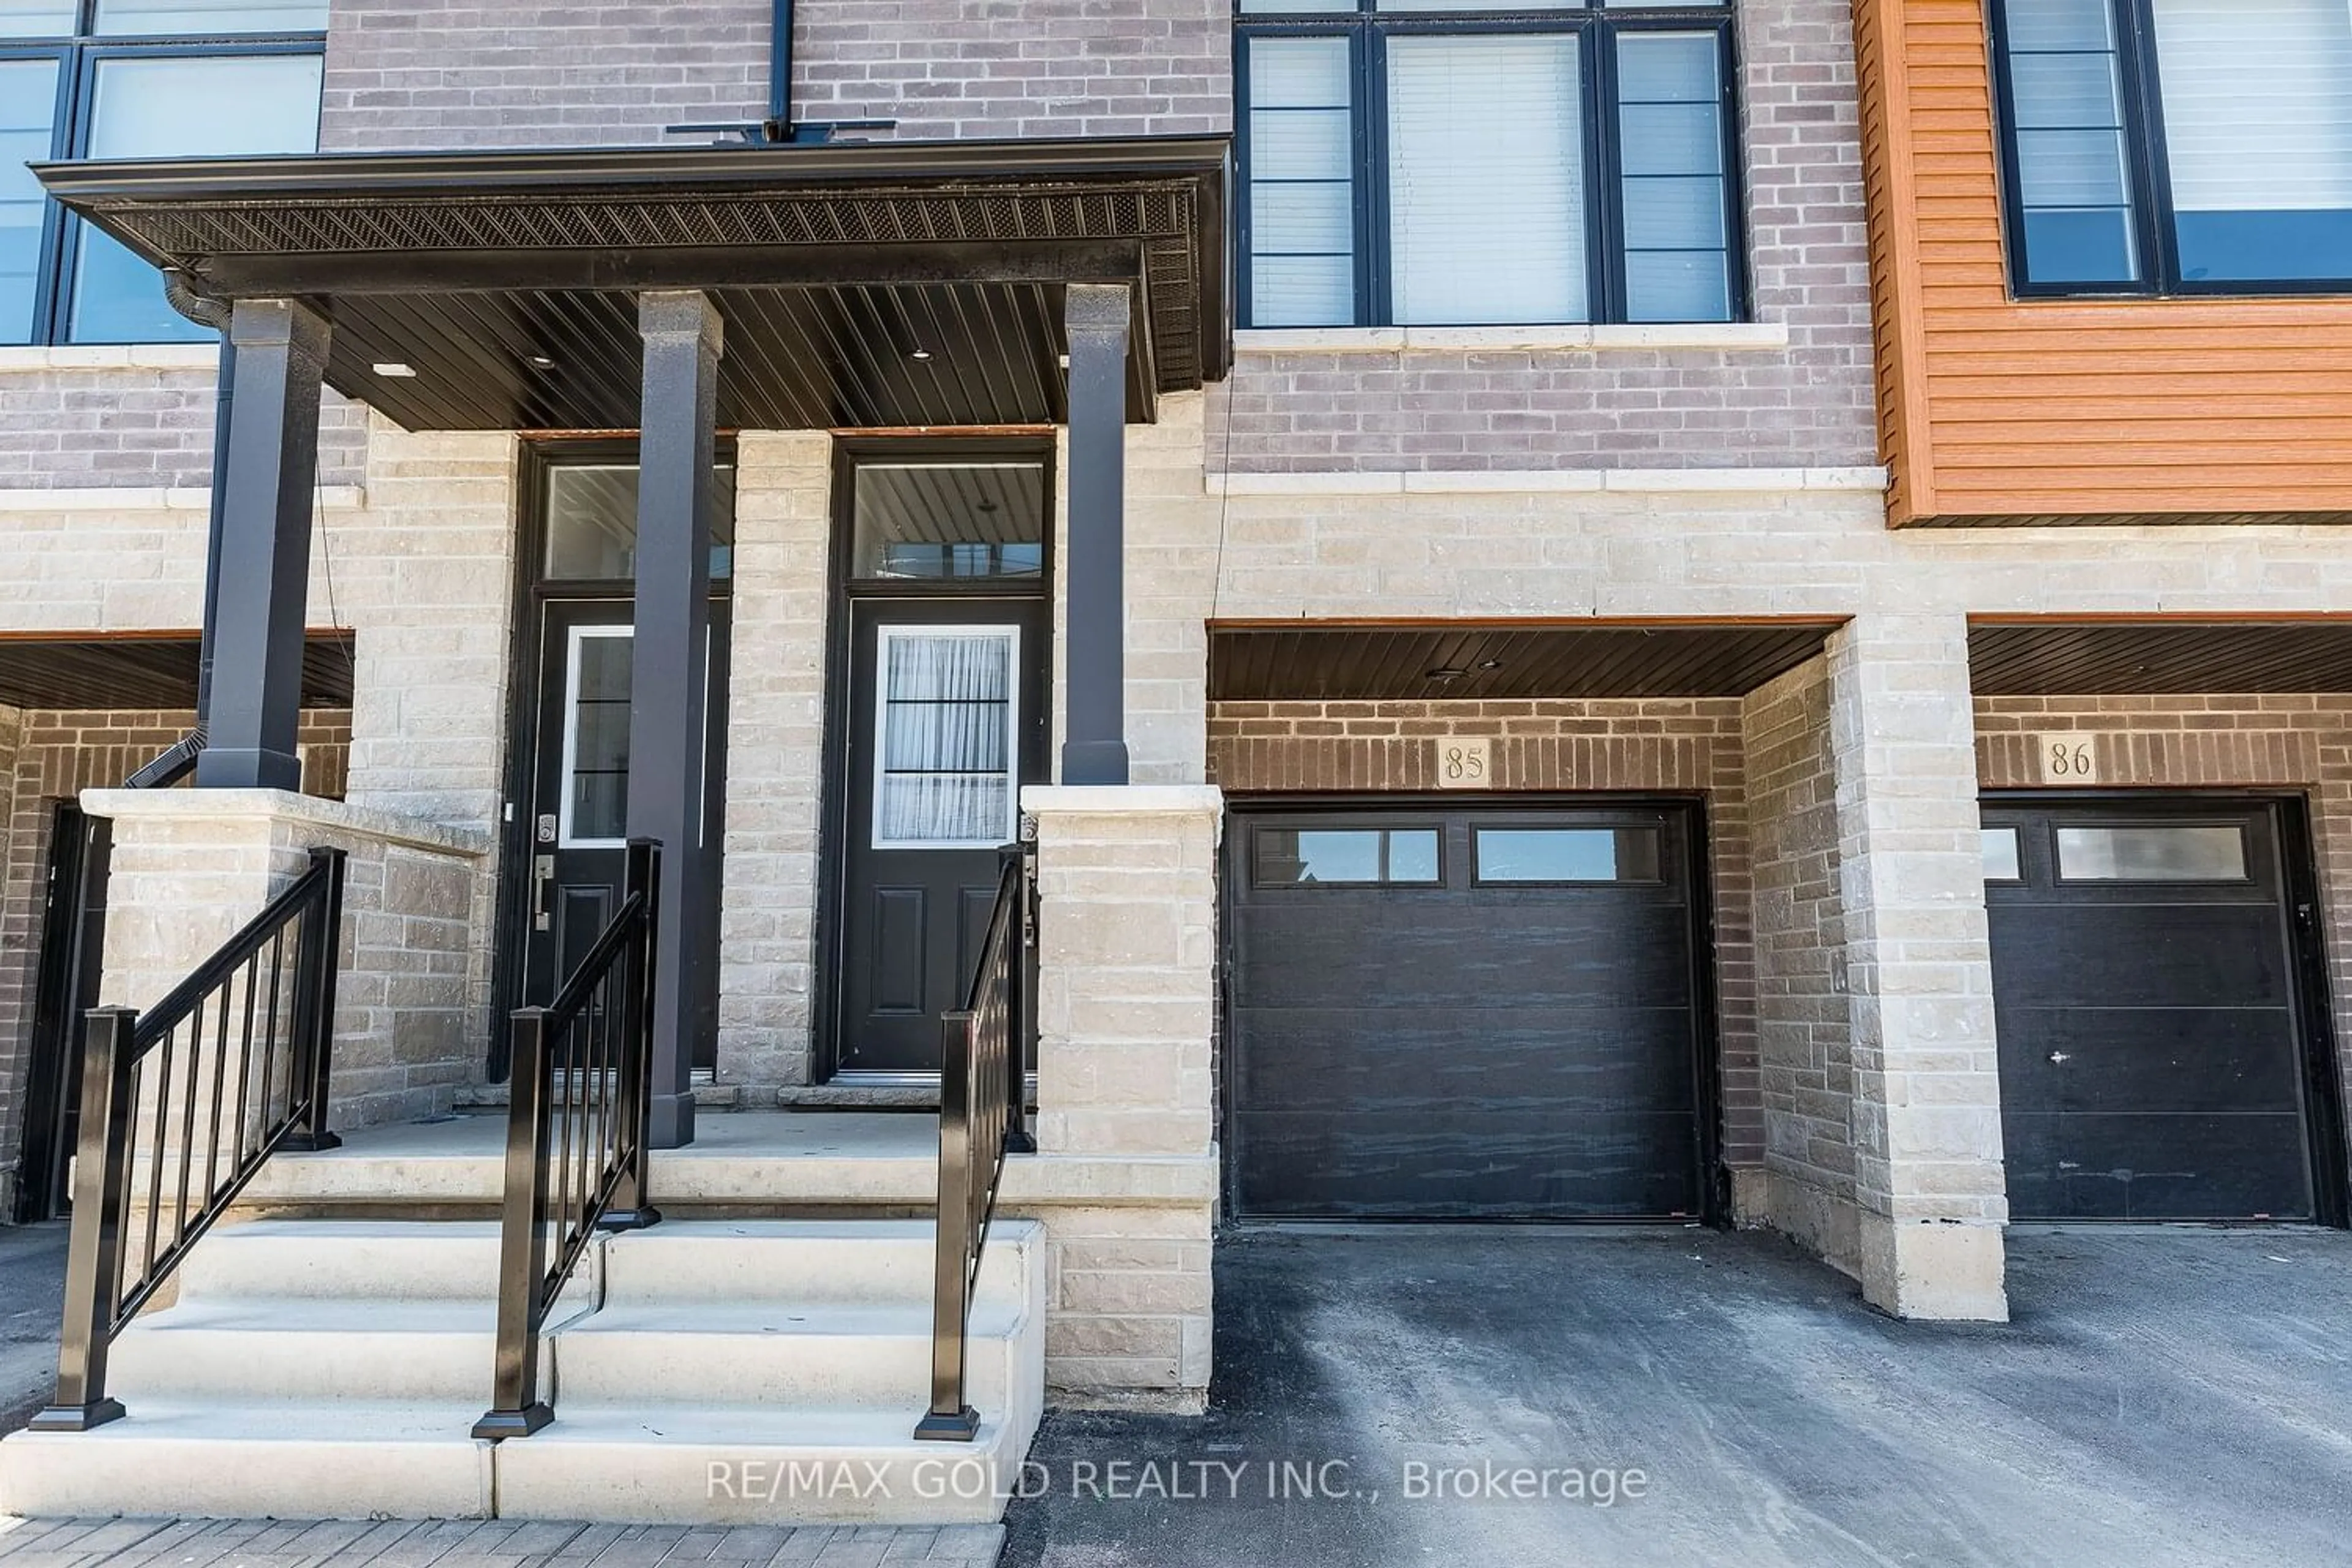 Home with brick exterior material for 461 Blackburn Dr #85, Brantford Ontario N3T 0W9